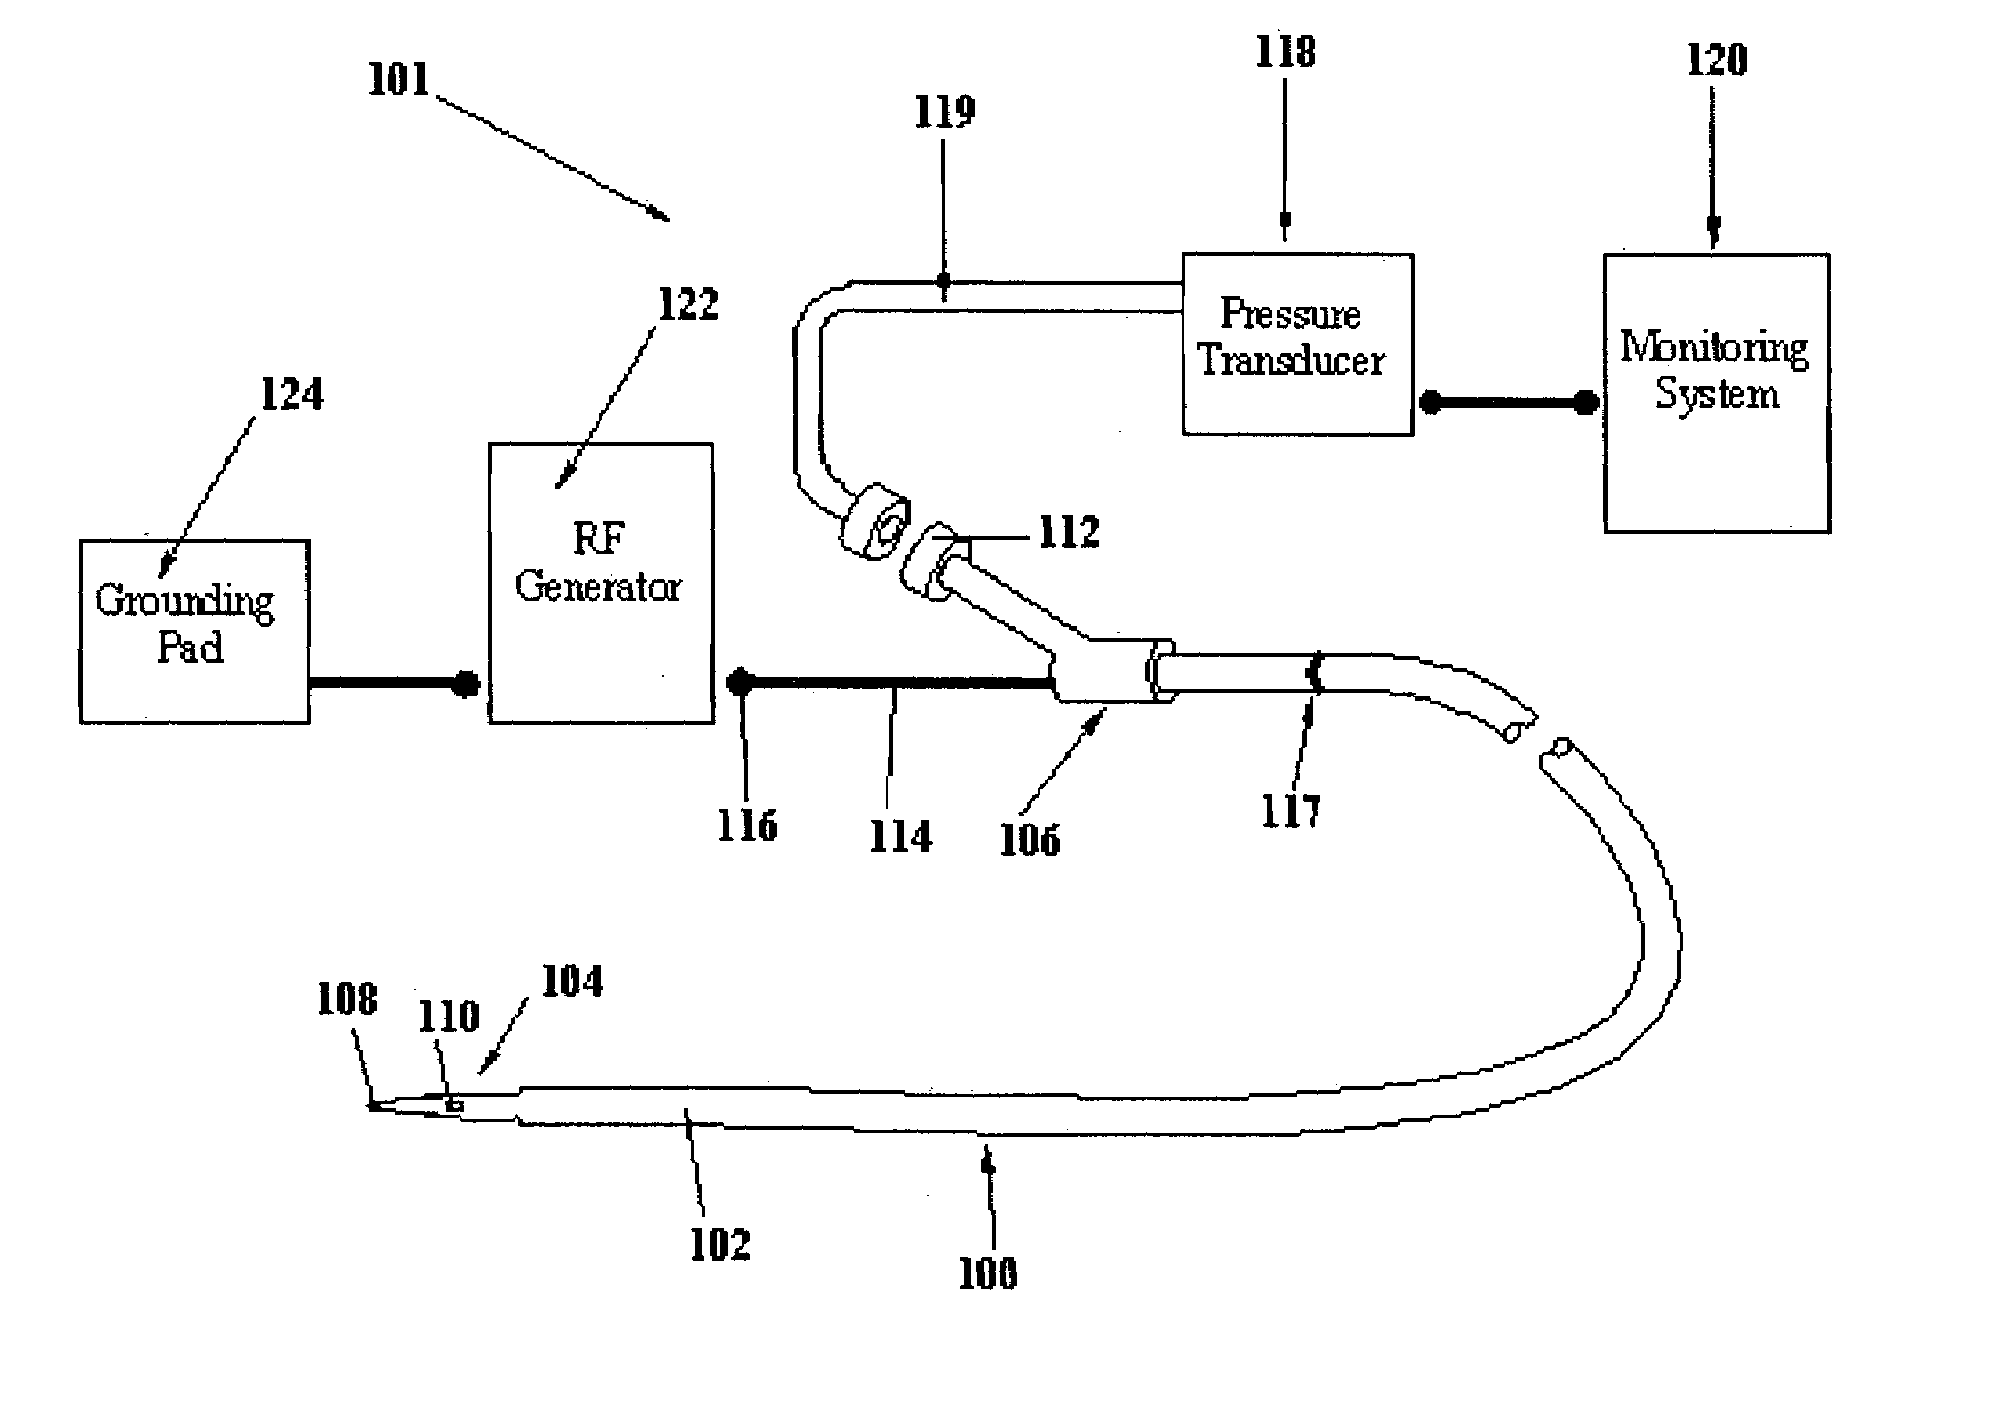 Surgical device with pressure monitoring ability